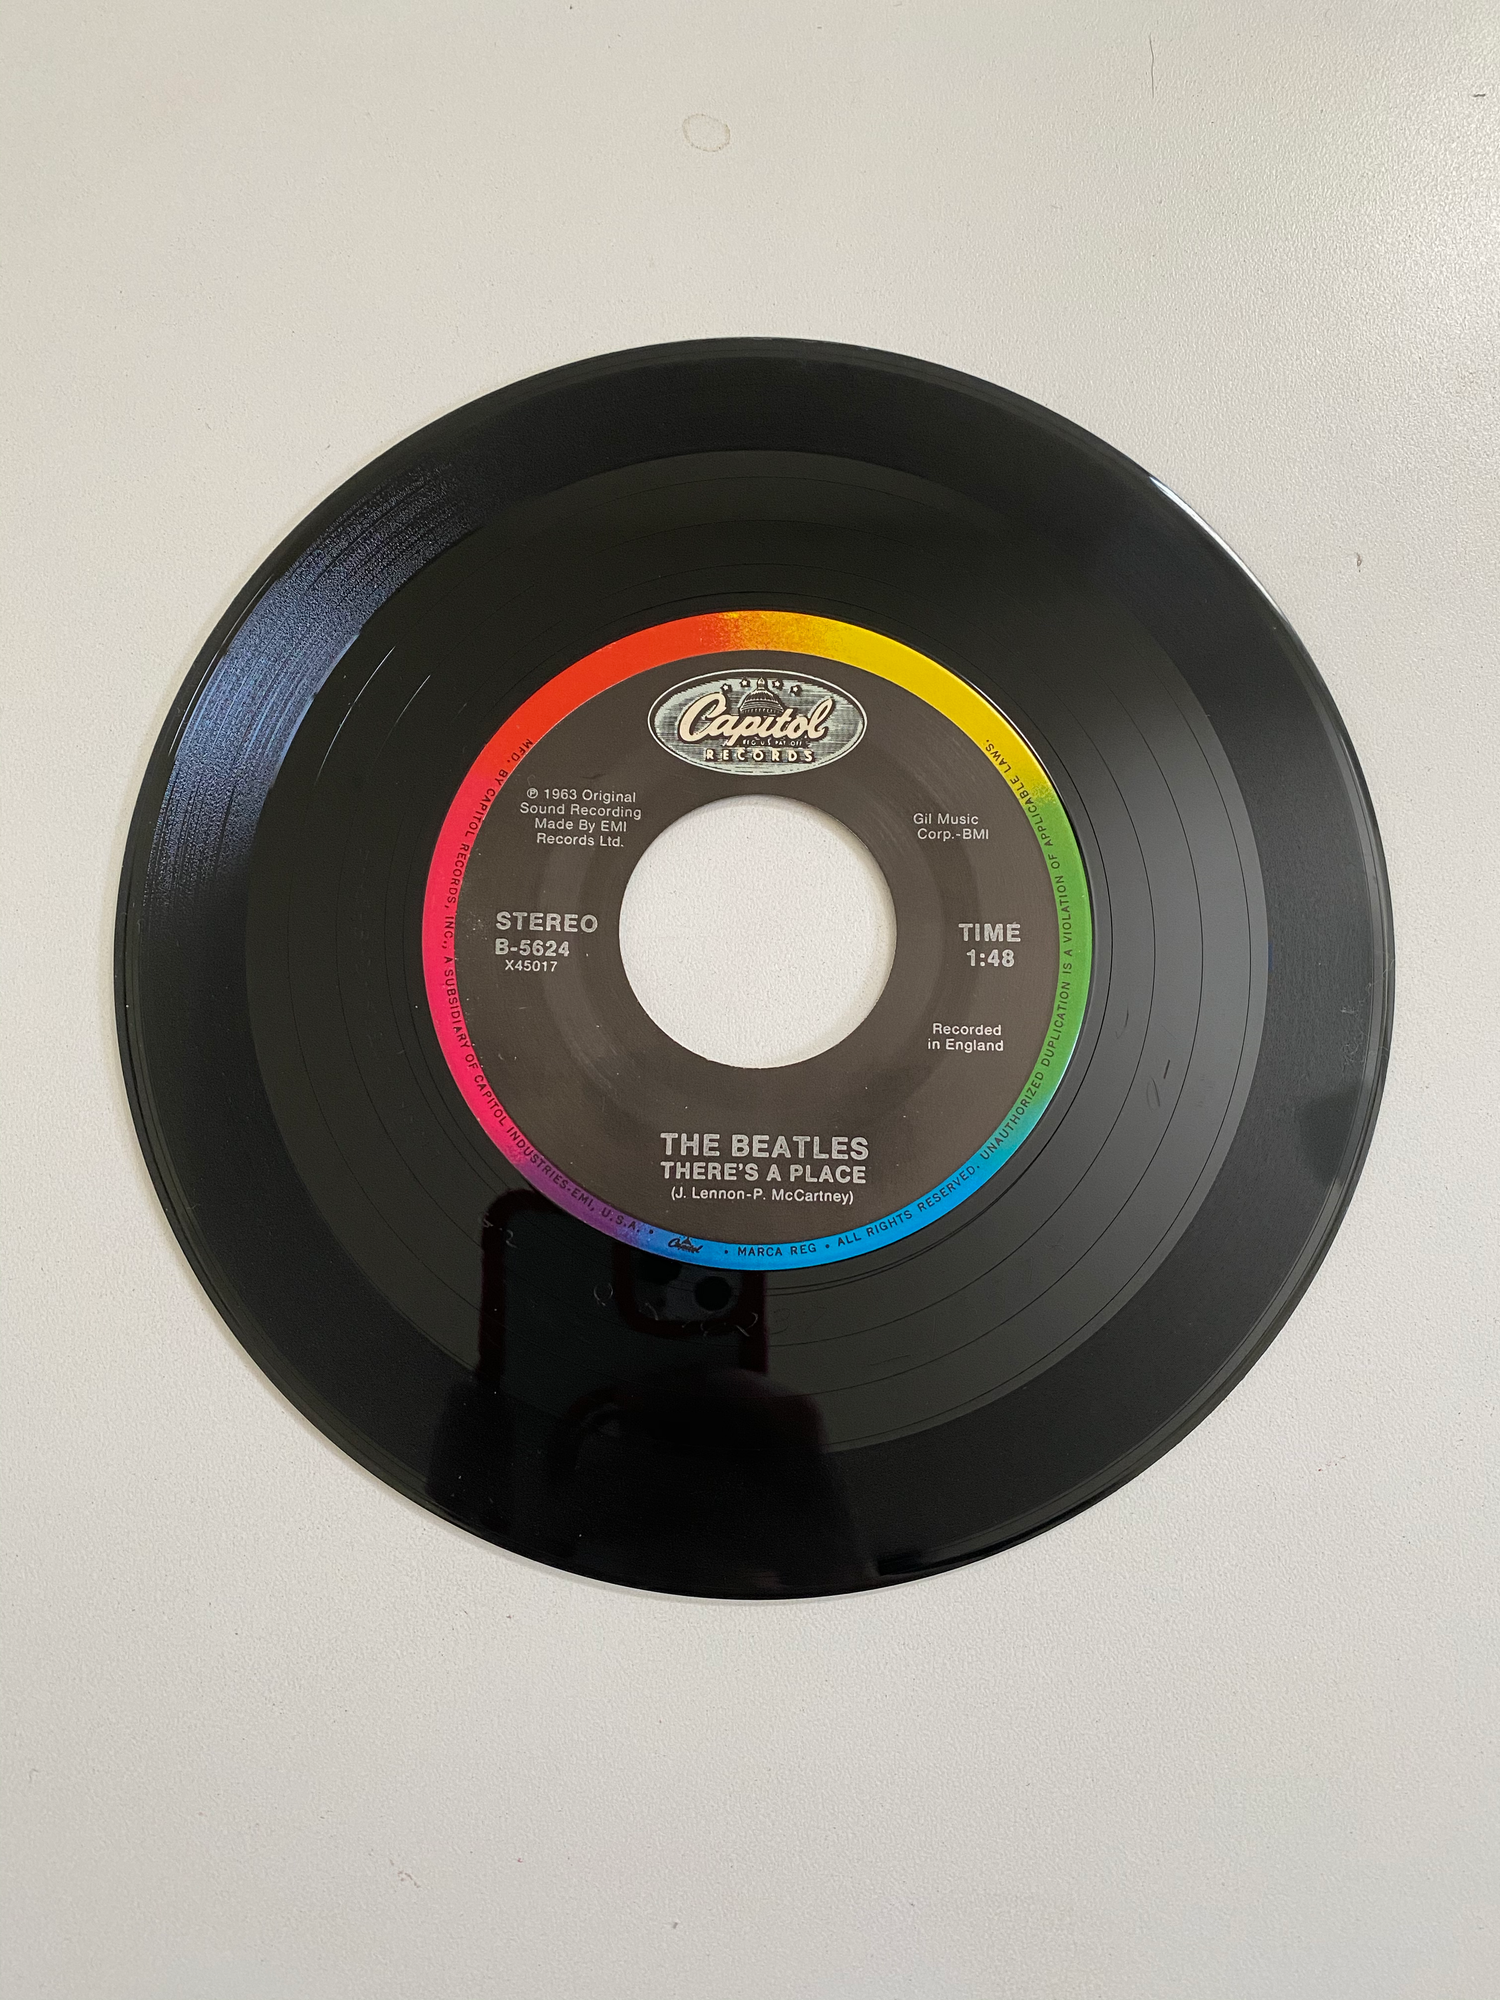 Beatles, The - Twist and Shout | 45 The Vintedge Co.